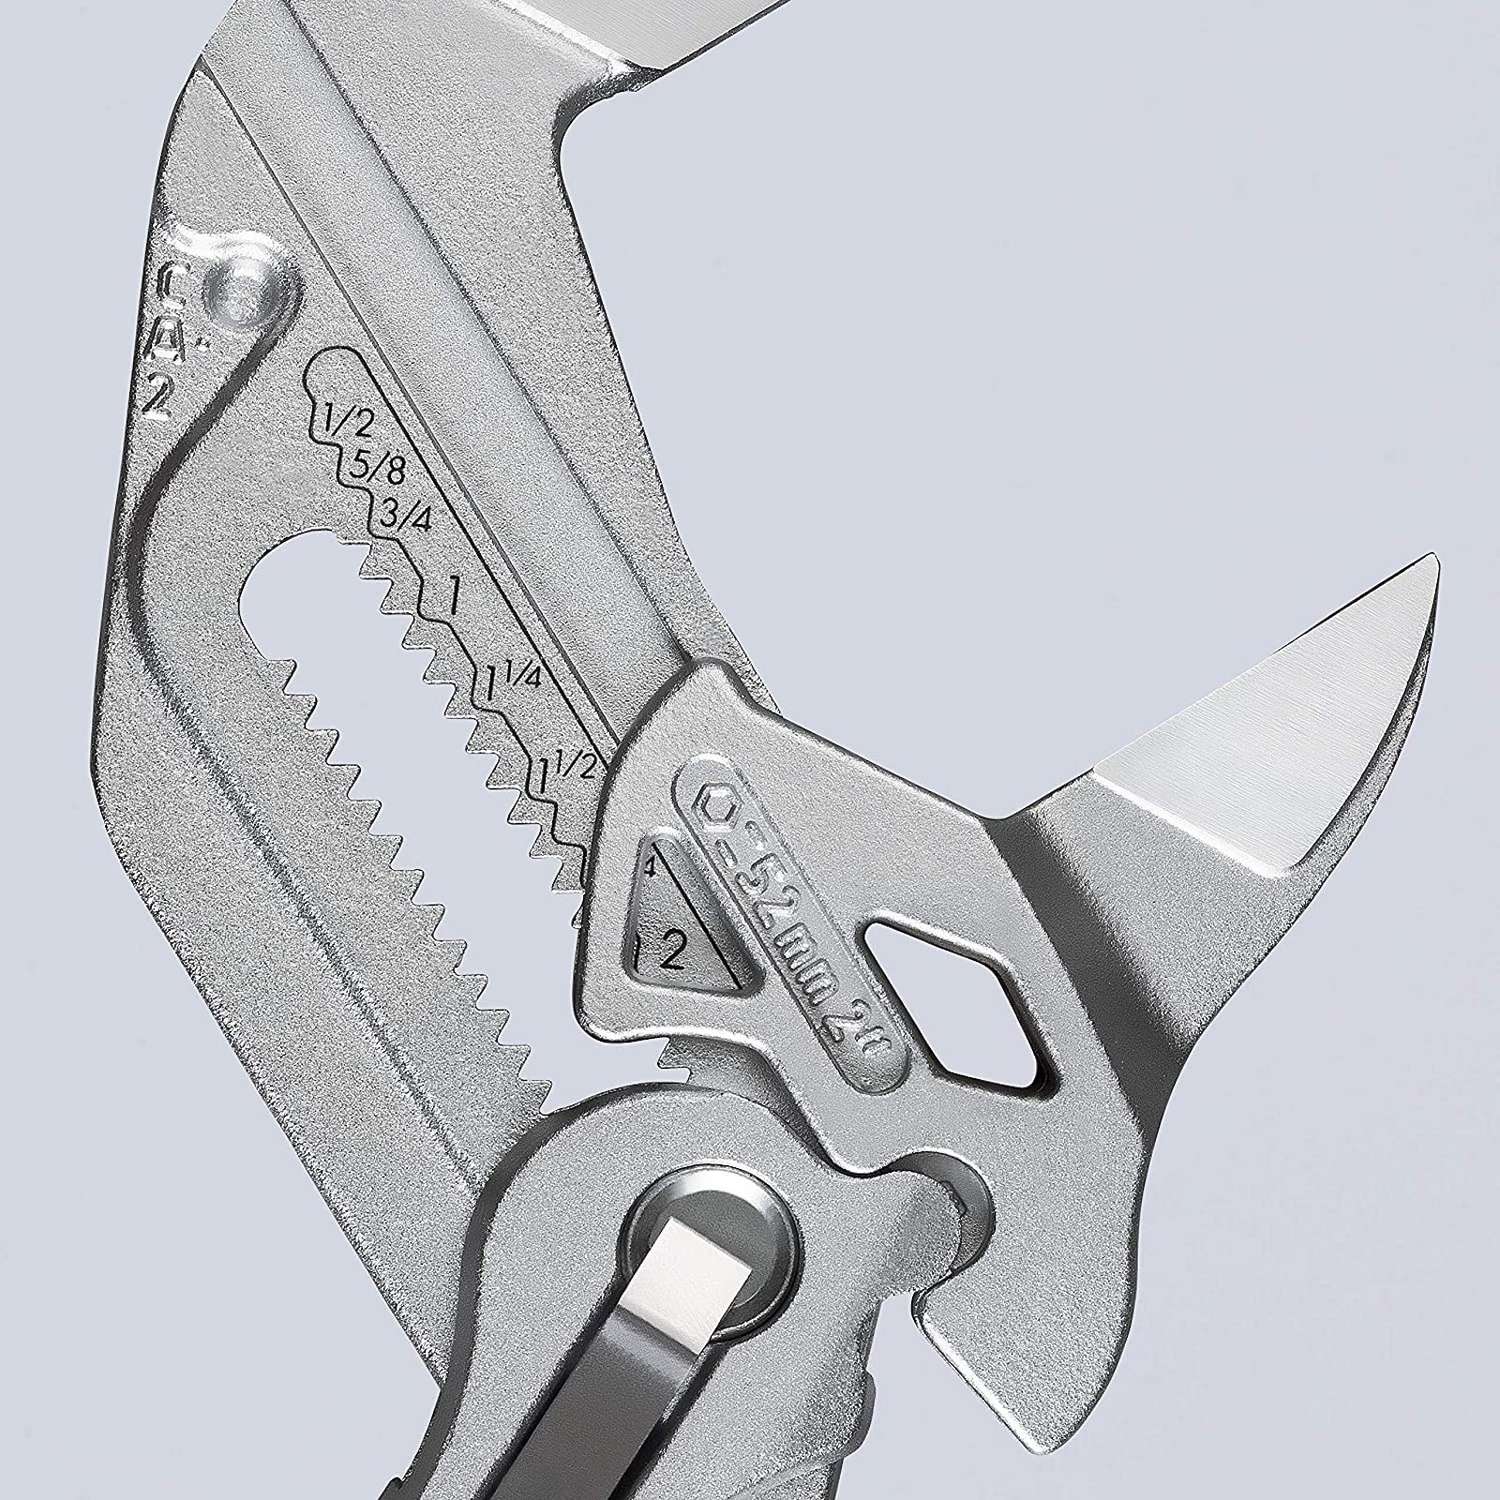 Knipex pliers wrench : r/Tools